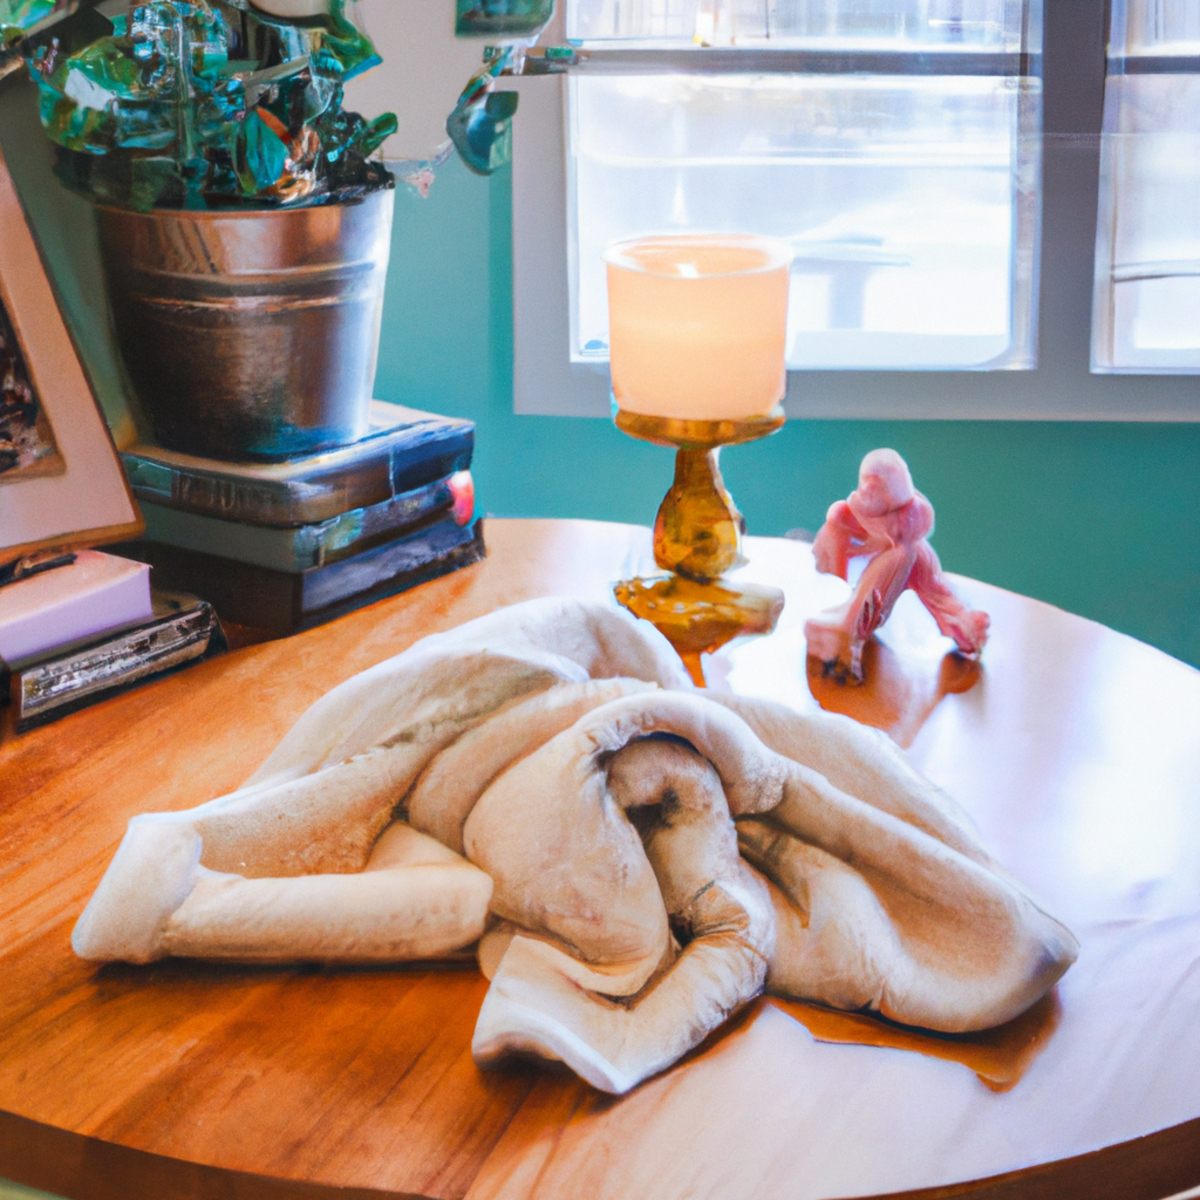 Cozy living room with self-care objects: blanket, books, pebbles, candle, tea. Promotes tranquility and stress reduction.